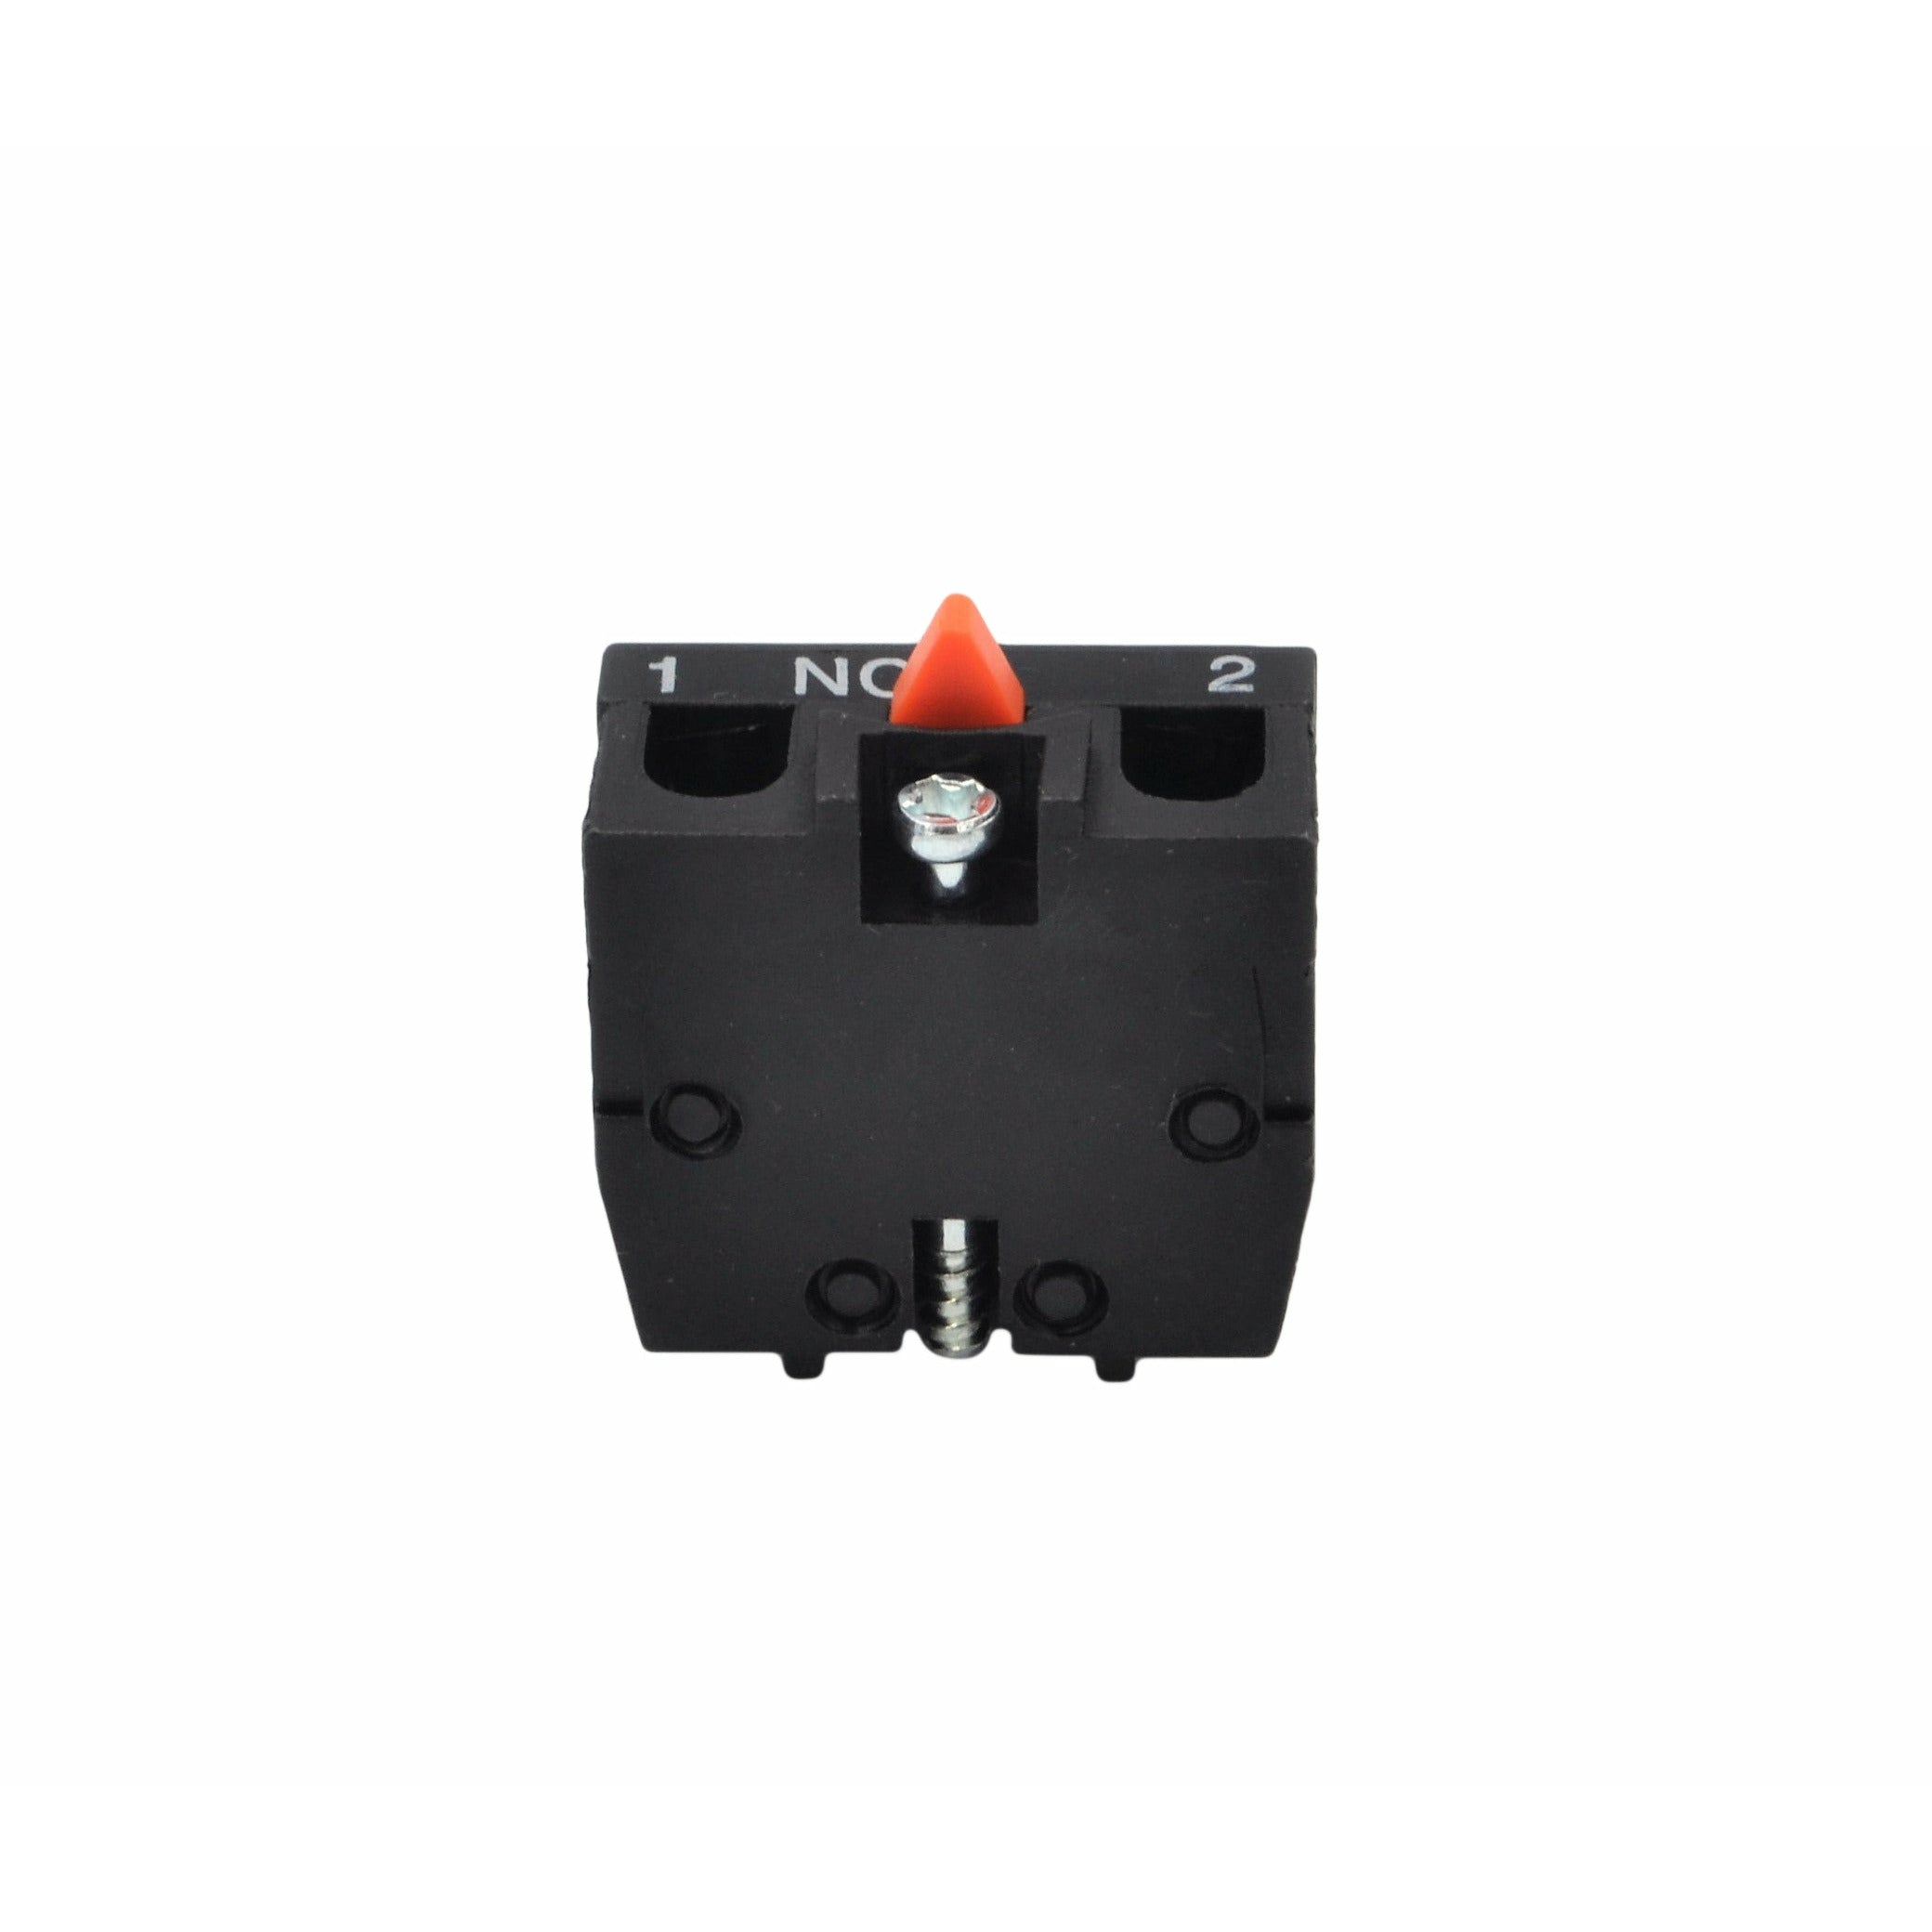  x2 XEN-L1121 Generic Red Plunger NC Contact Block Switch